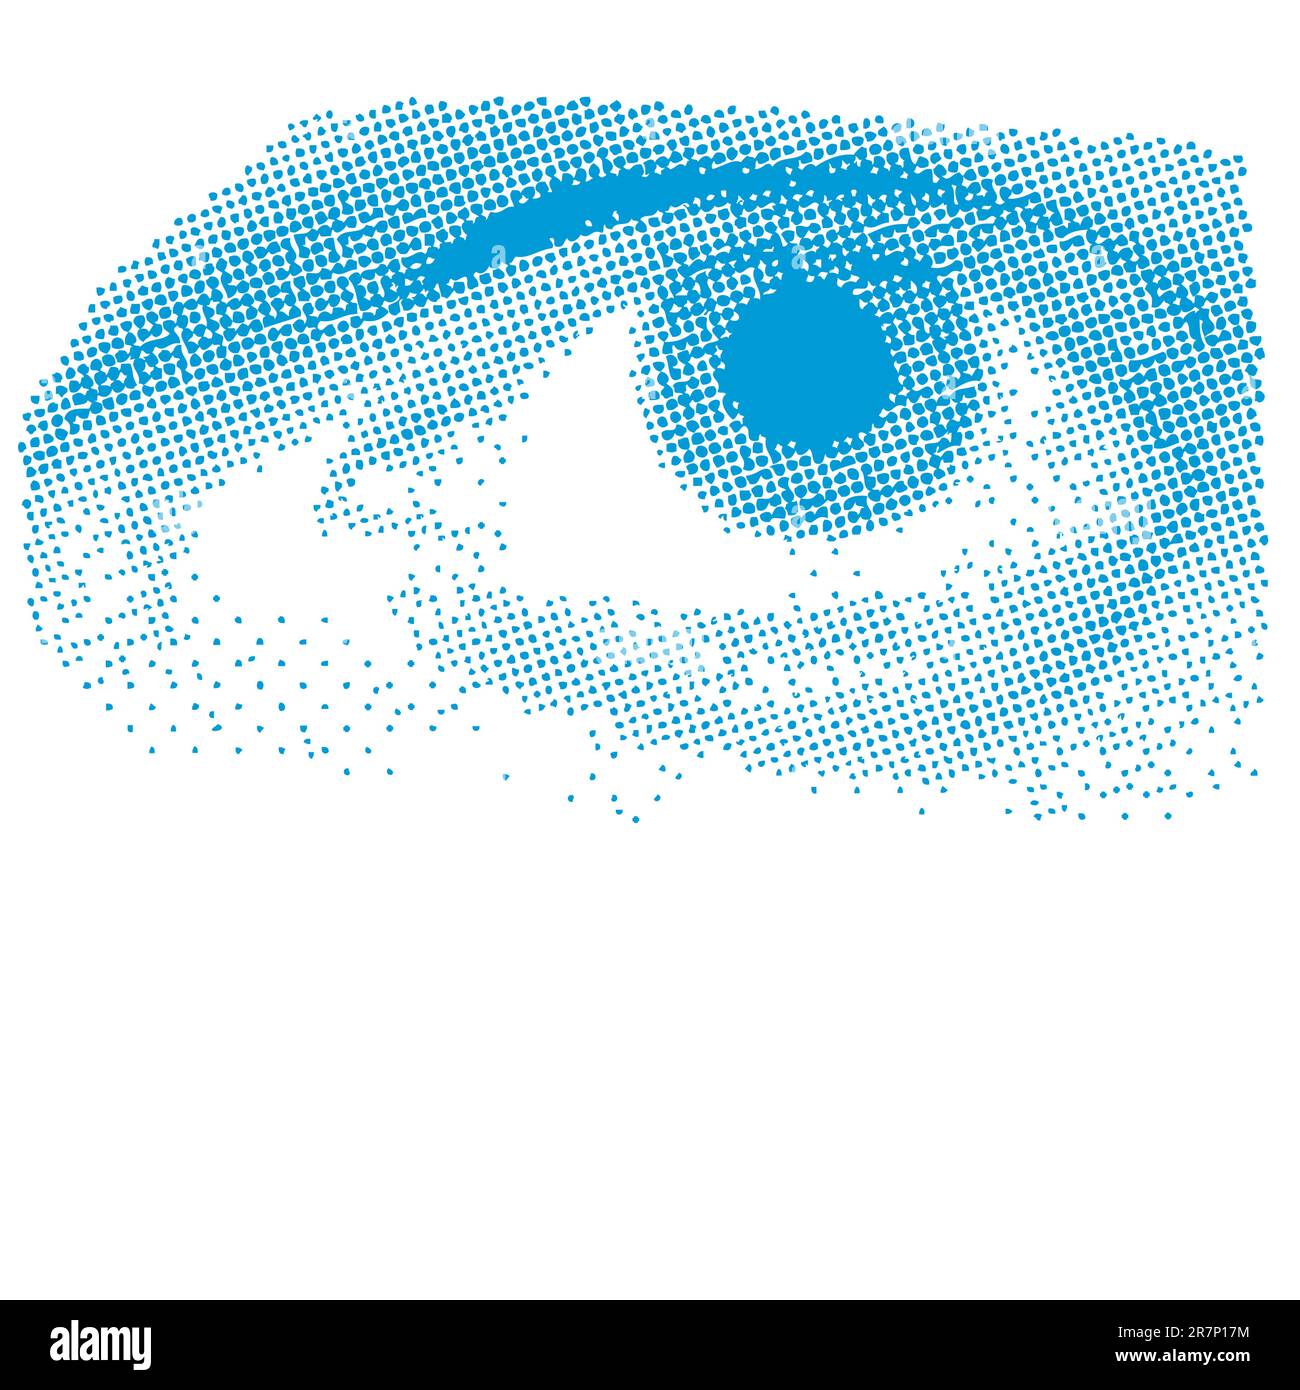 Blue Halftone Eye - Close-Up of Man's Face On White Background Stock Vector